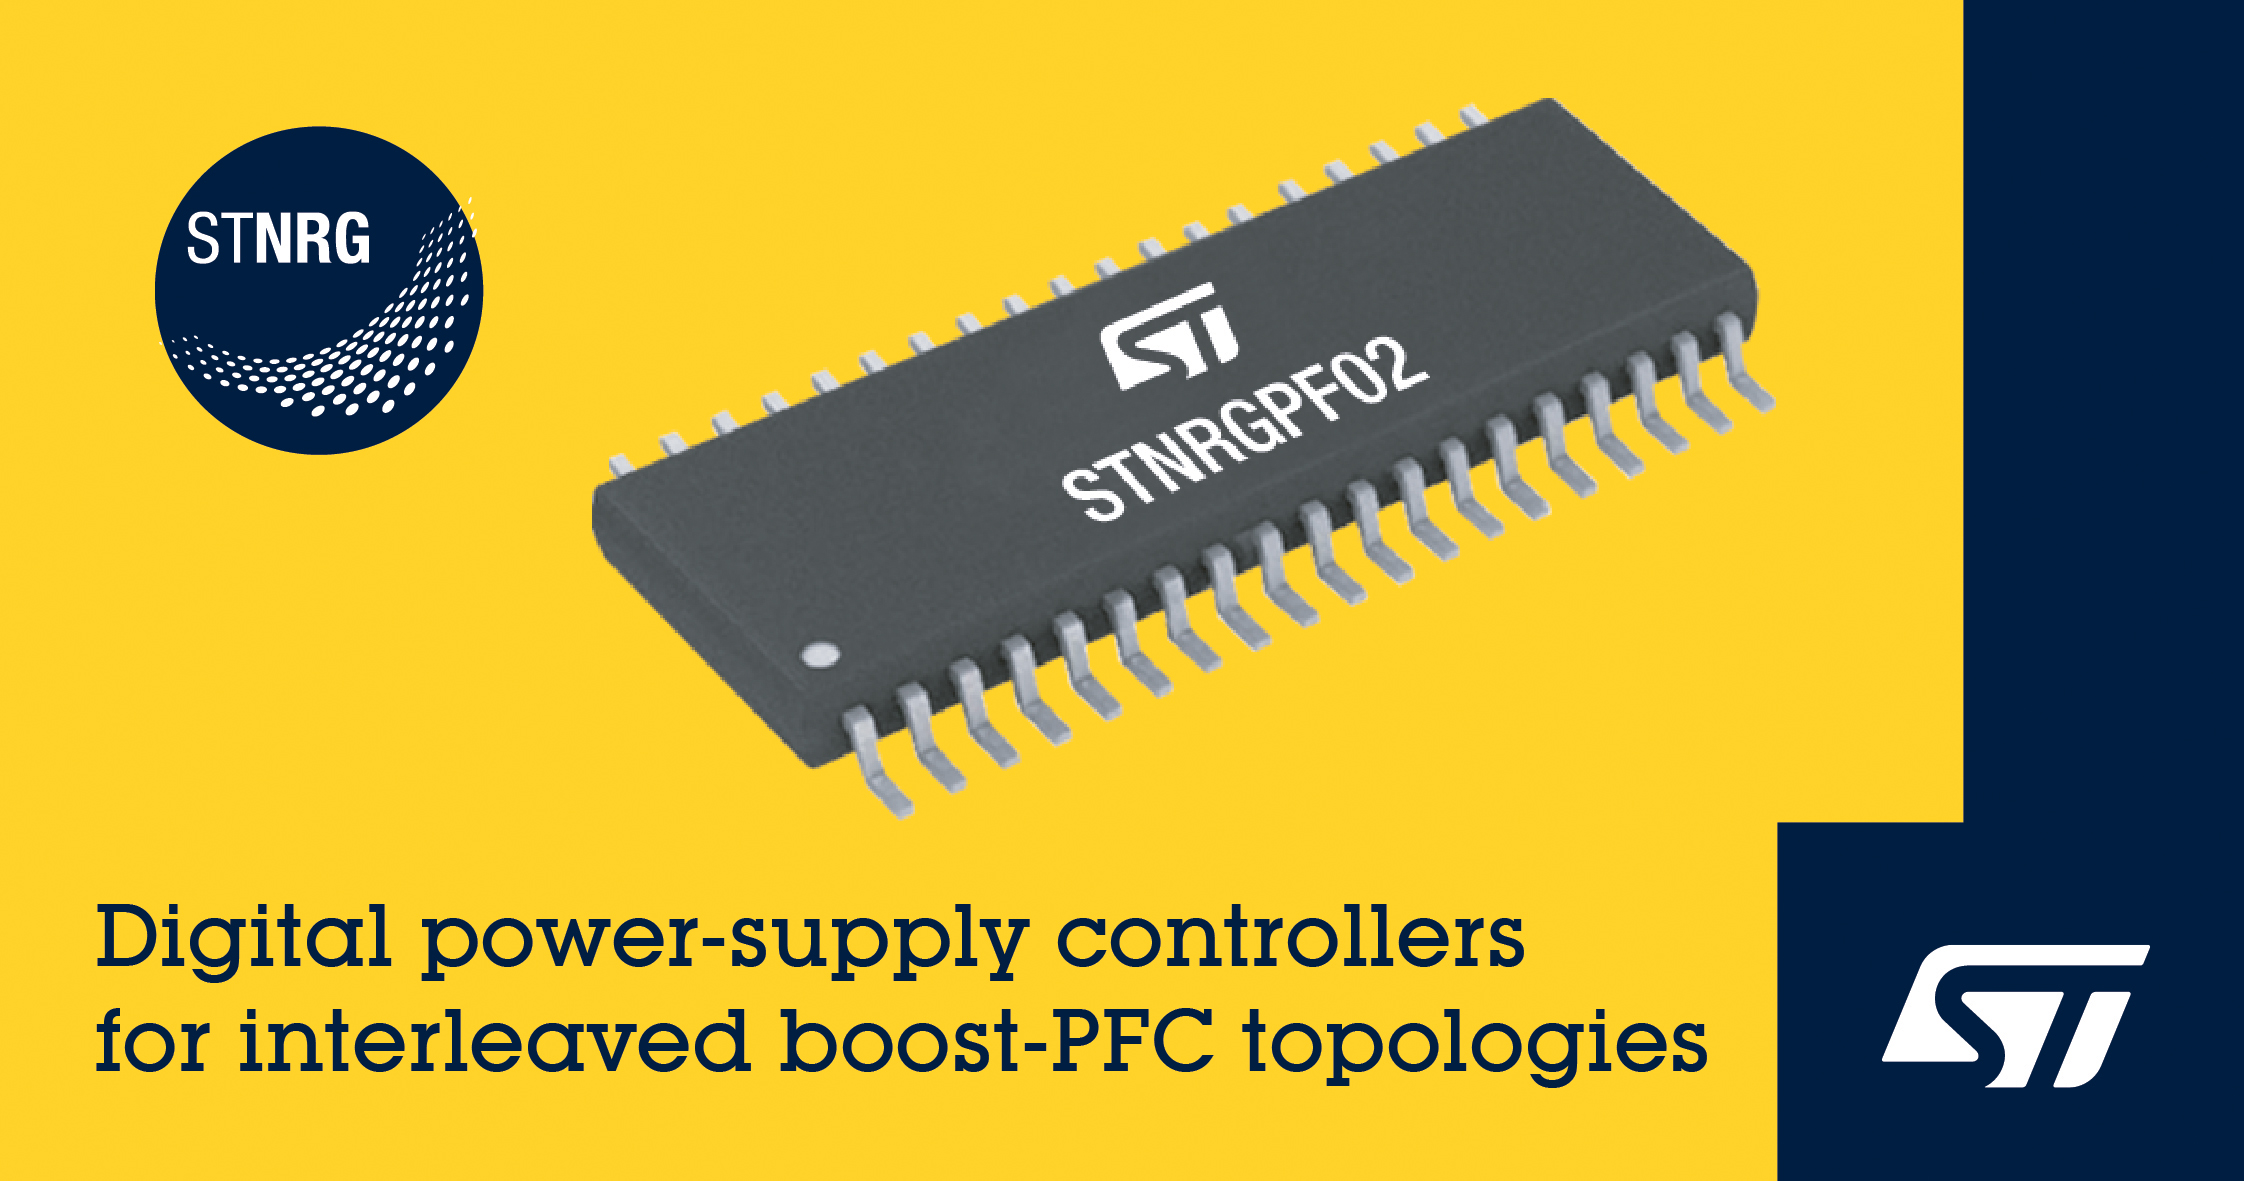 STMicroelectronics Extends Digital-Power Choices in 600W-6kW Range